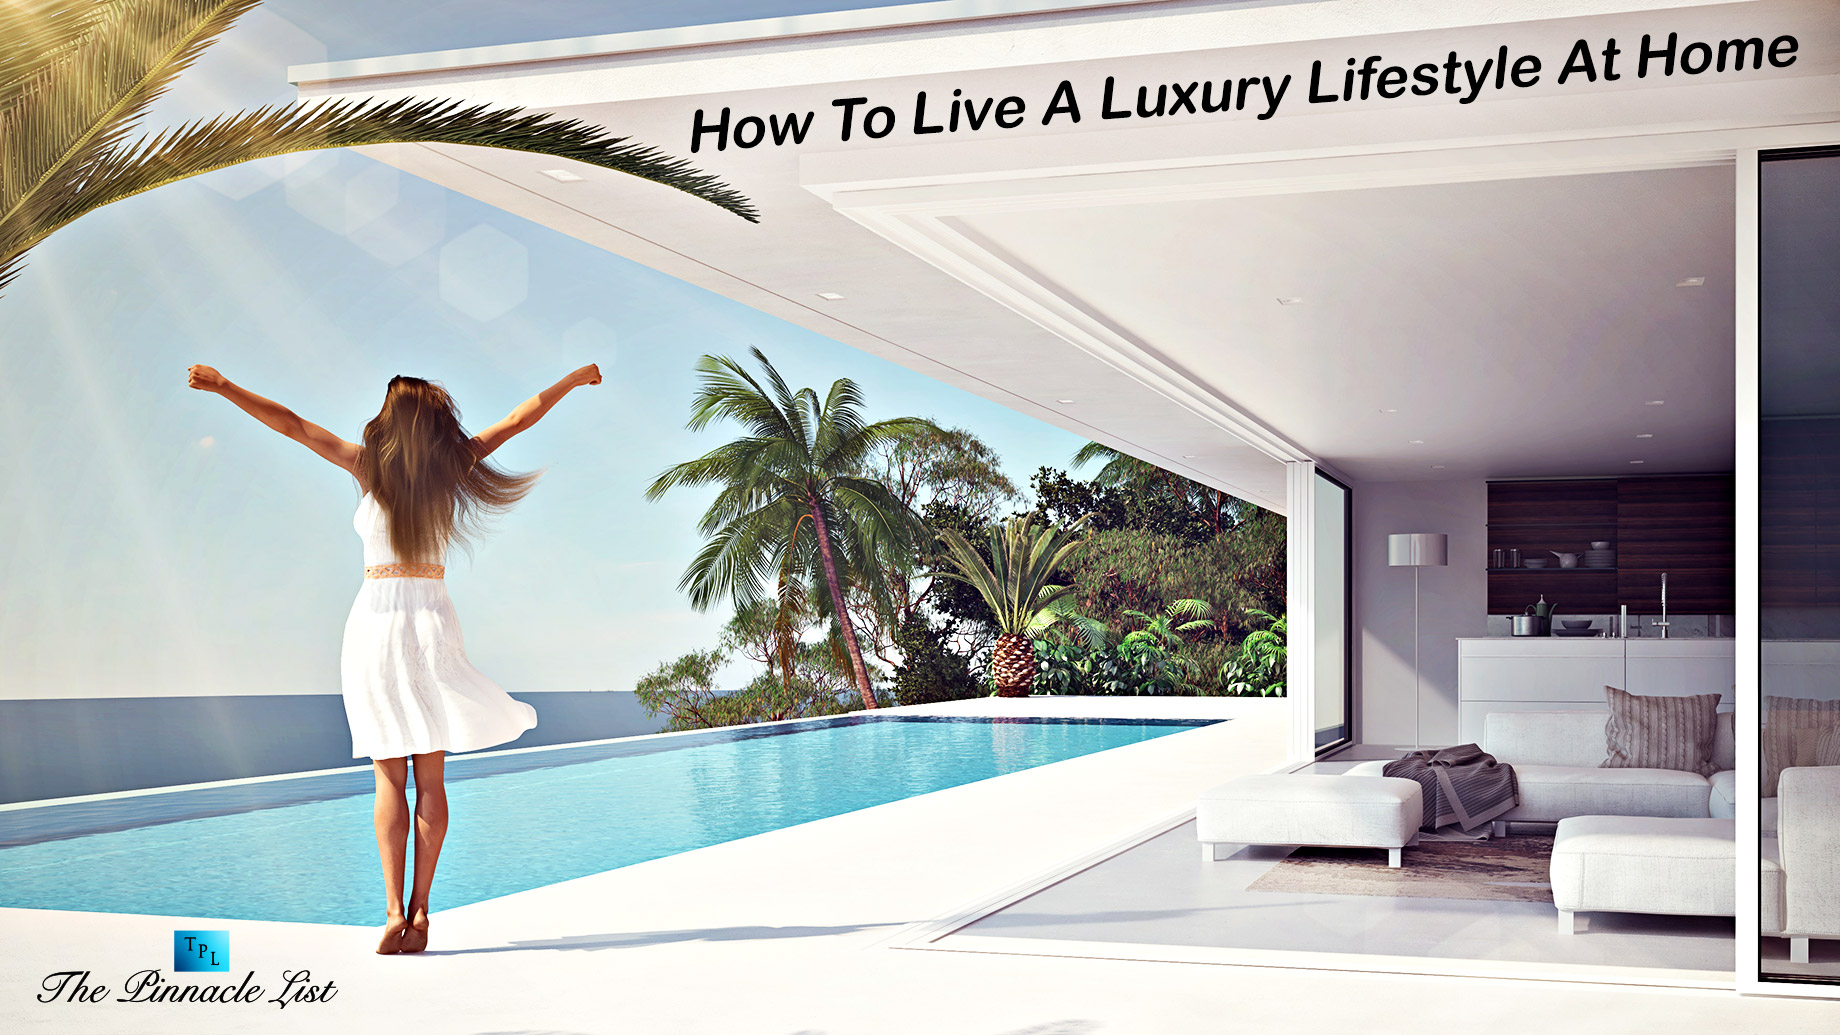 How To Live A Luxury Lifestyle At Home